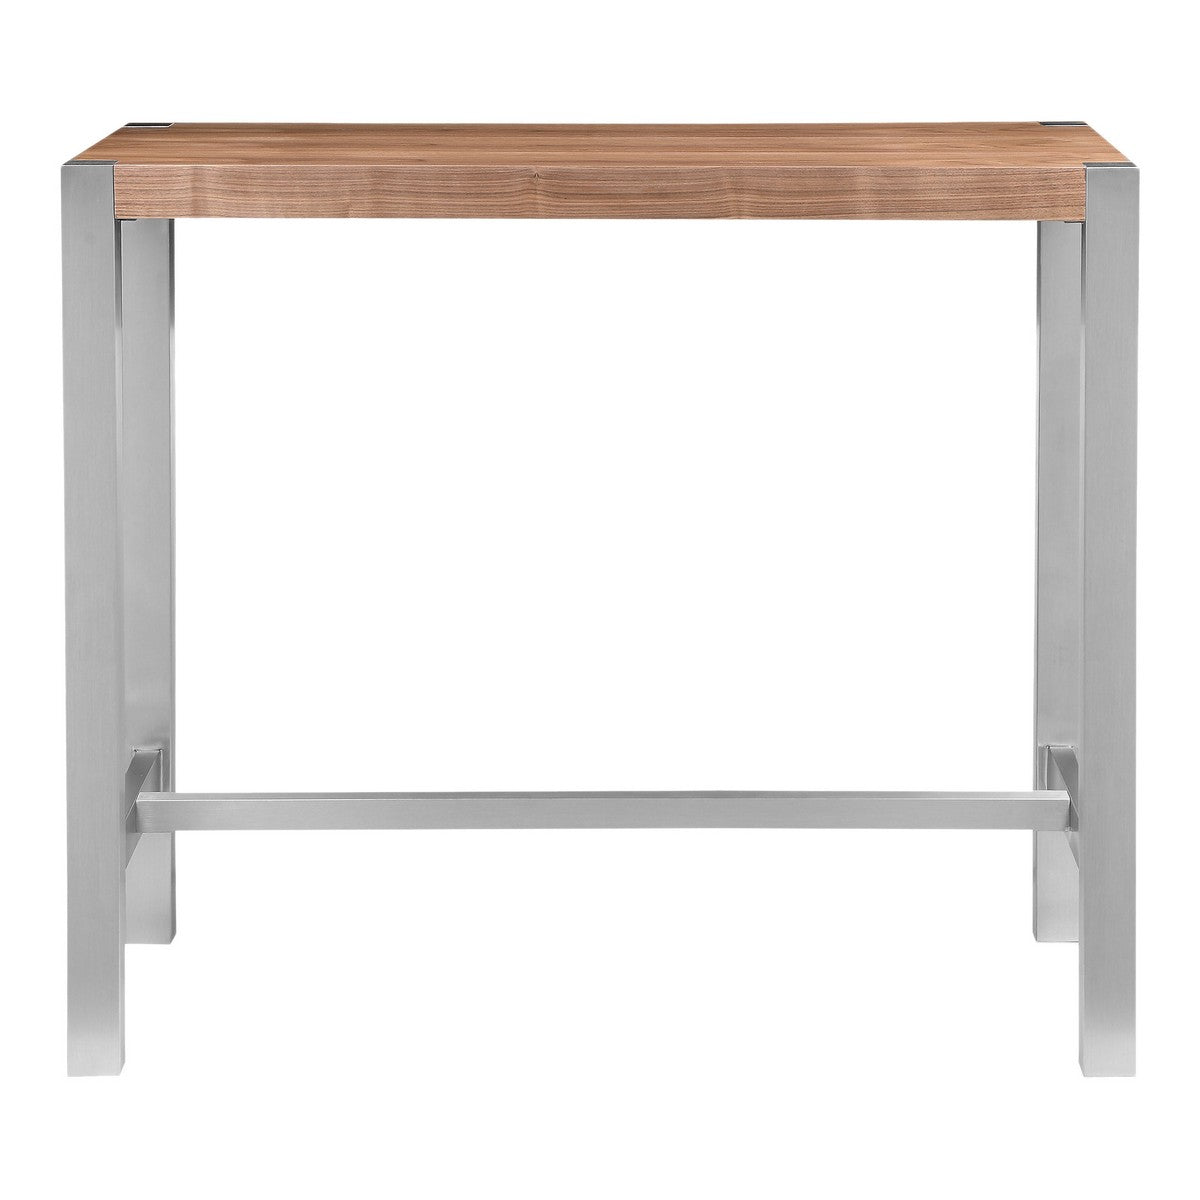 Moe's Home Collection Riva Bar Table Walnut - ER-1080-03 - Moe's Home Collection - Bar Tables - Minimal And Modern - 1